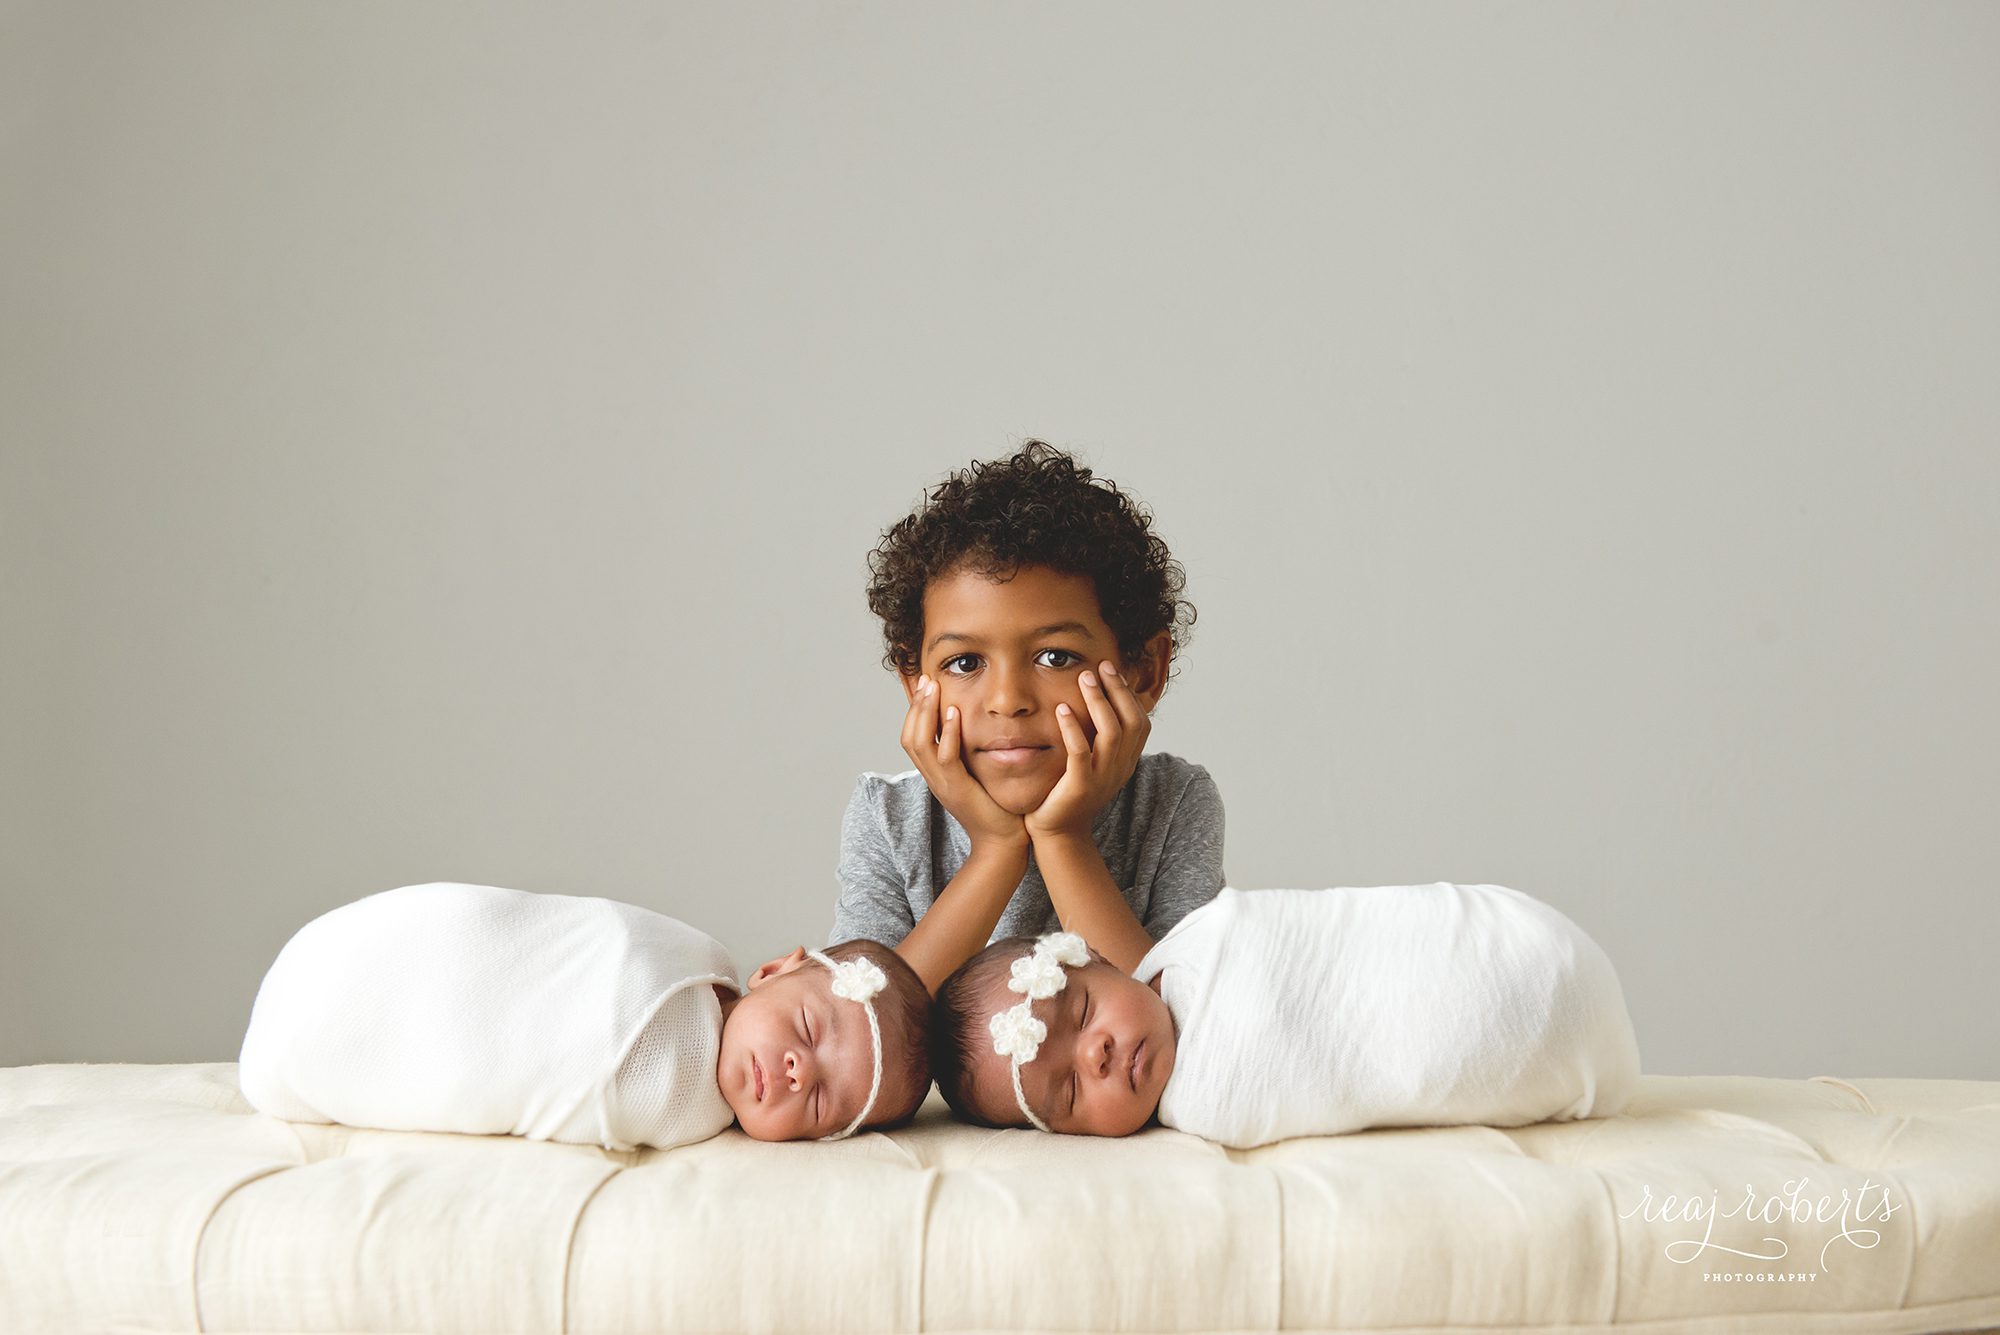 newborn twin photos with older sibling | Reaj Roberts Photography